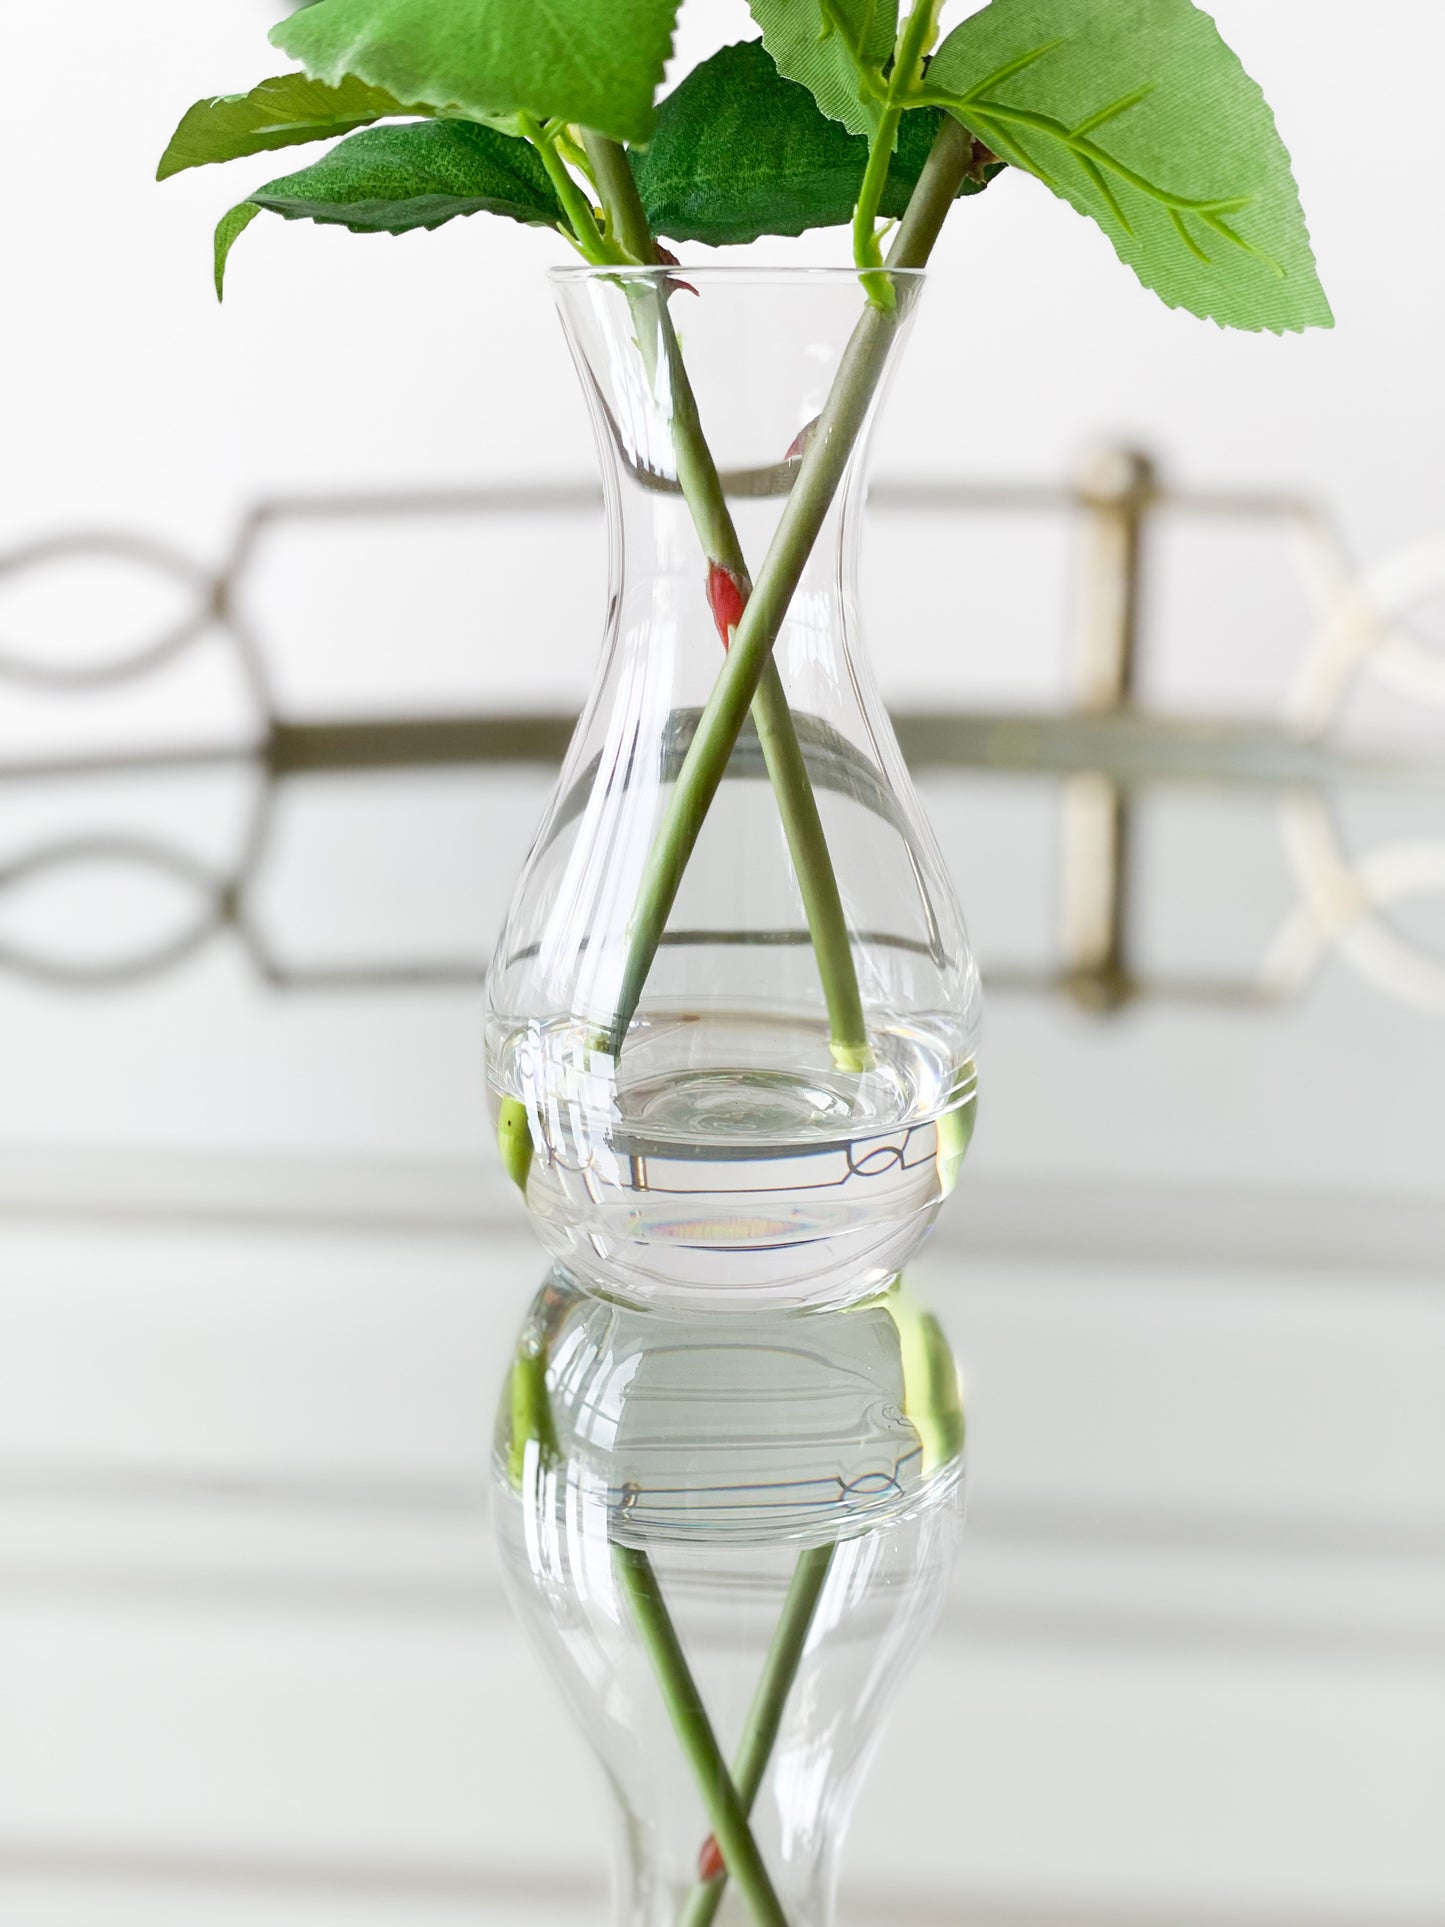 White Double Rosebud In Glass Vase With Acrylic Water